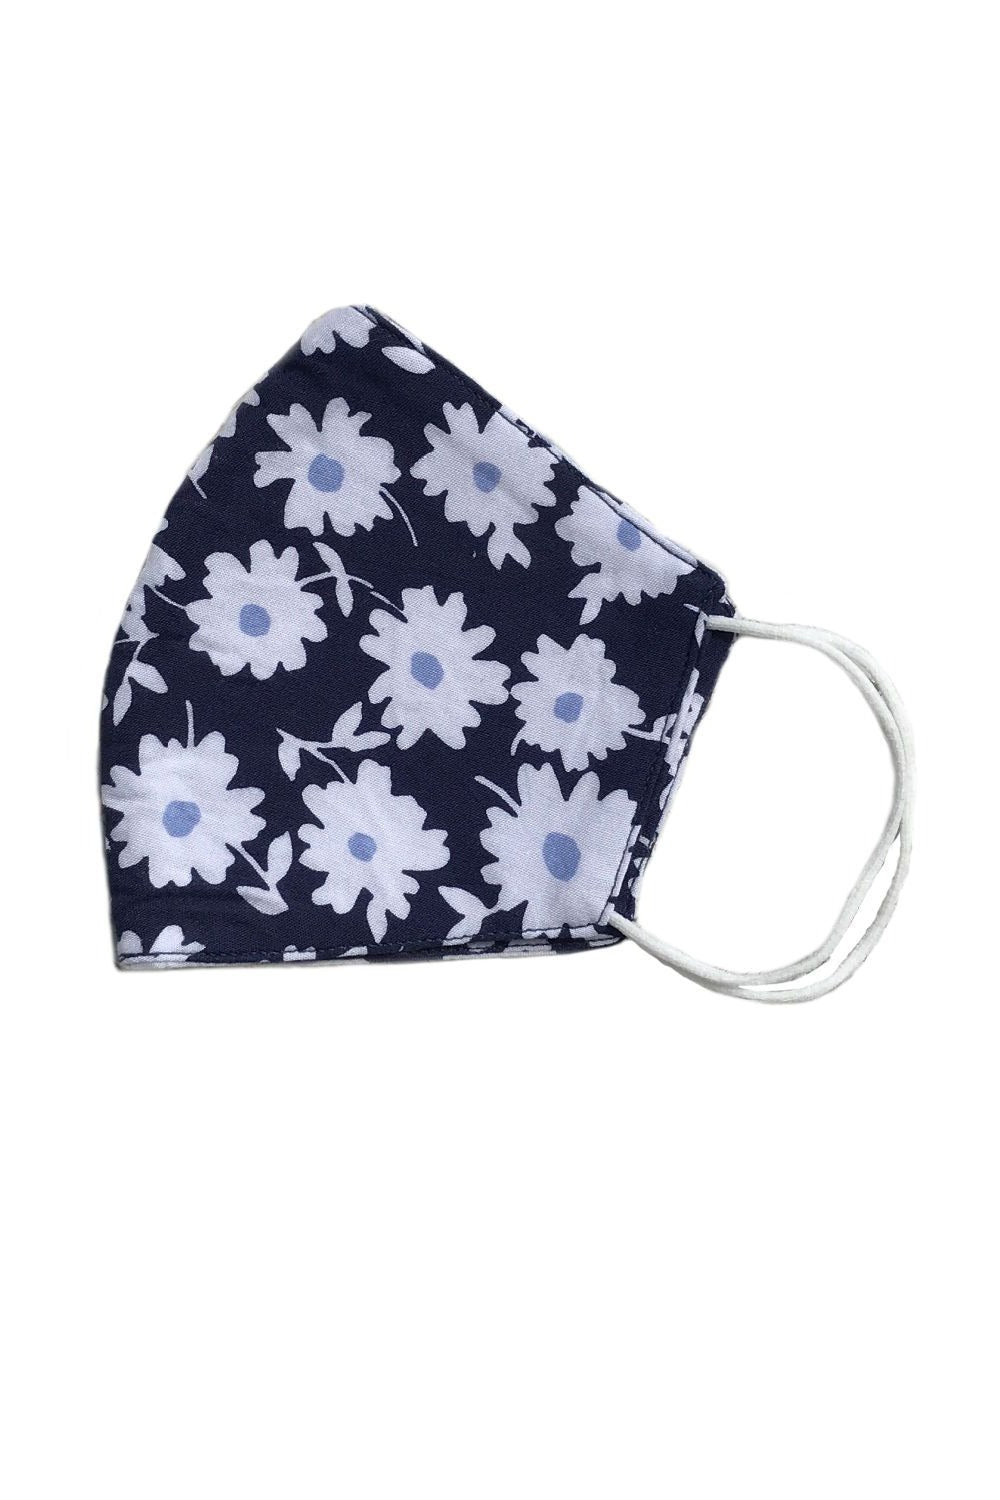 face-mask-fabric-blue-white-floral-print